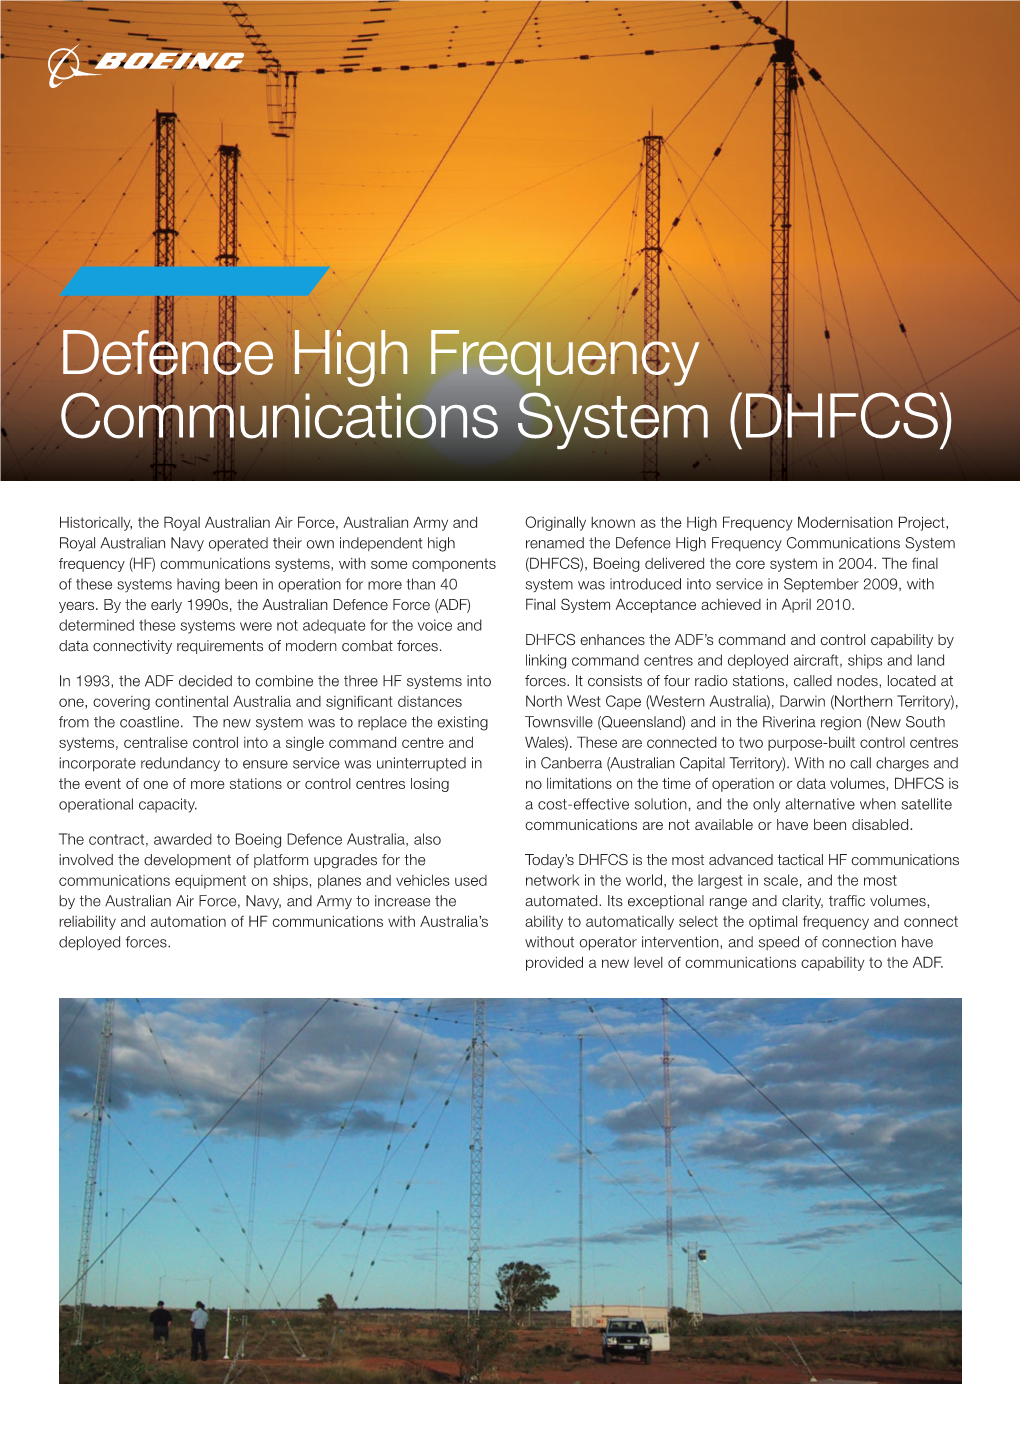 Defence High Frequency Communications System (DHFCS)